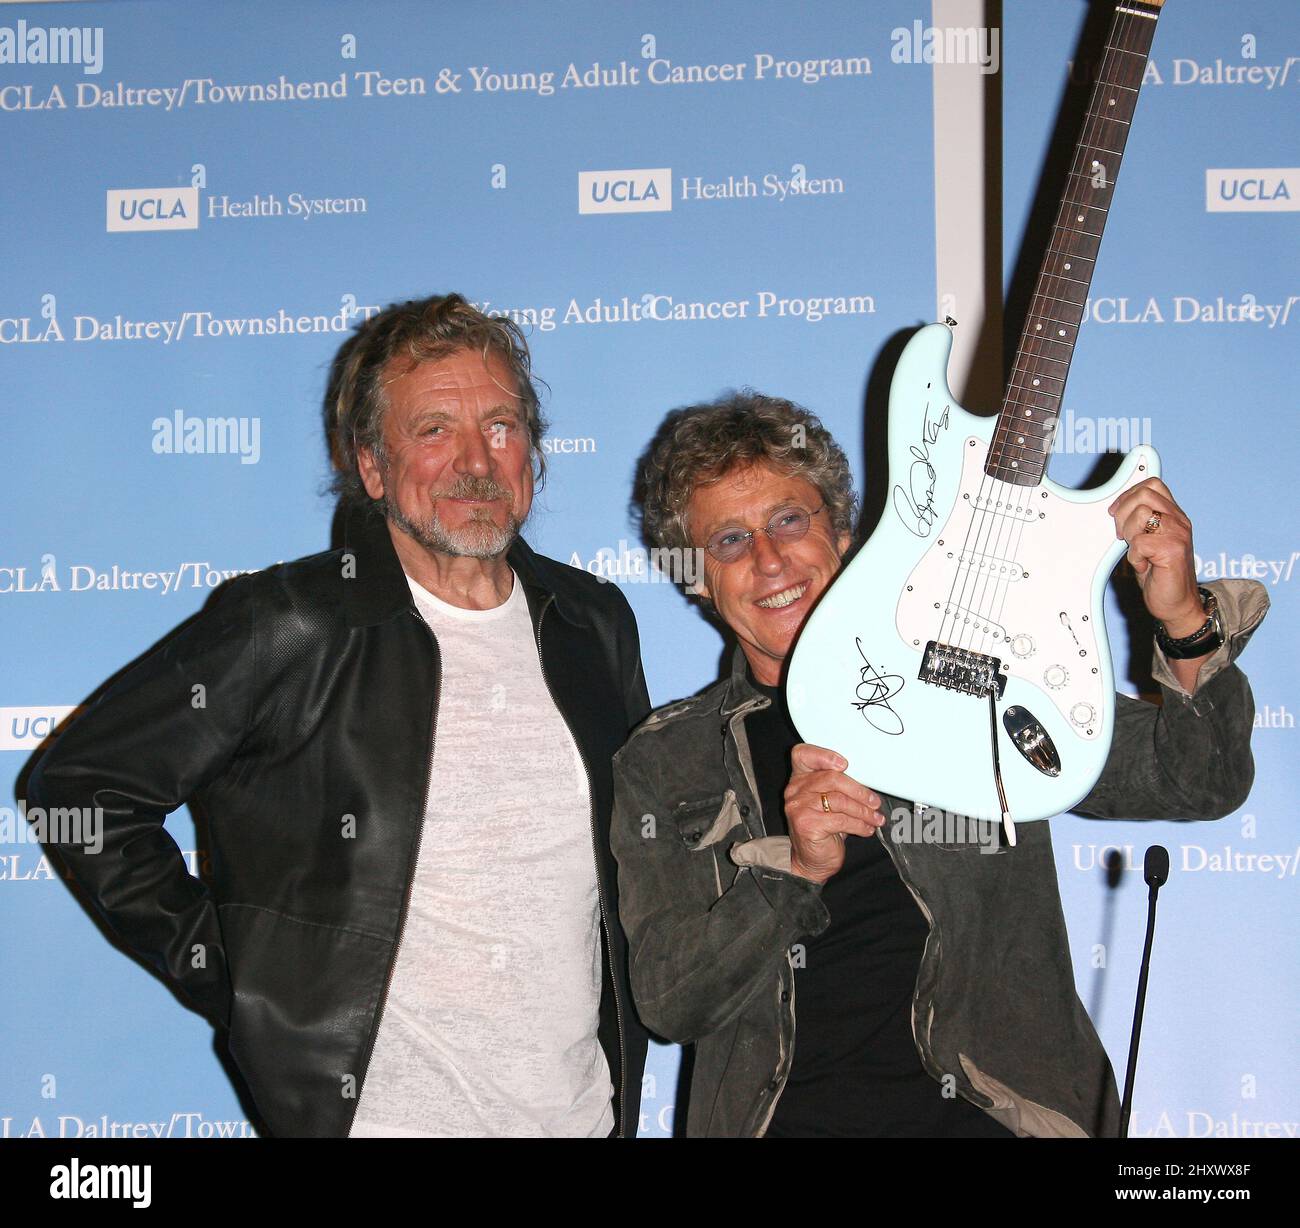 Robert Plant and Roger Daltery at a news conference at the Ronald Reagan UCLA Medical Center in Los Angeles. Daltrey and Plant pledged to raise money to renovate part of the hospital pediatric floor into a separate space for patients ages 15 to 24 Stock Photo